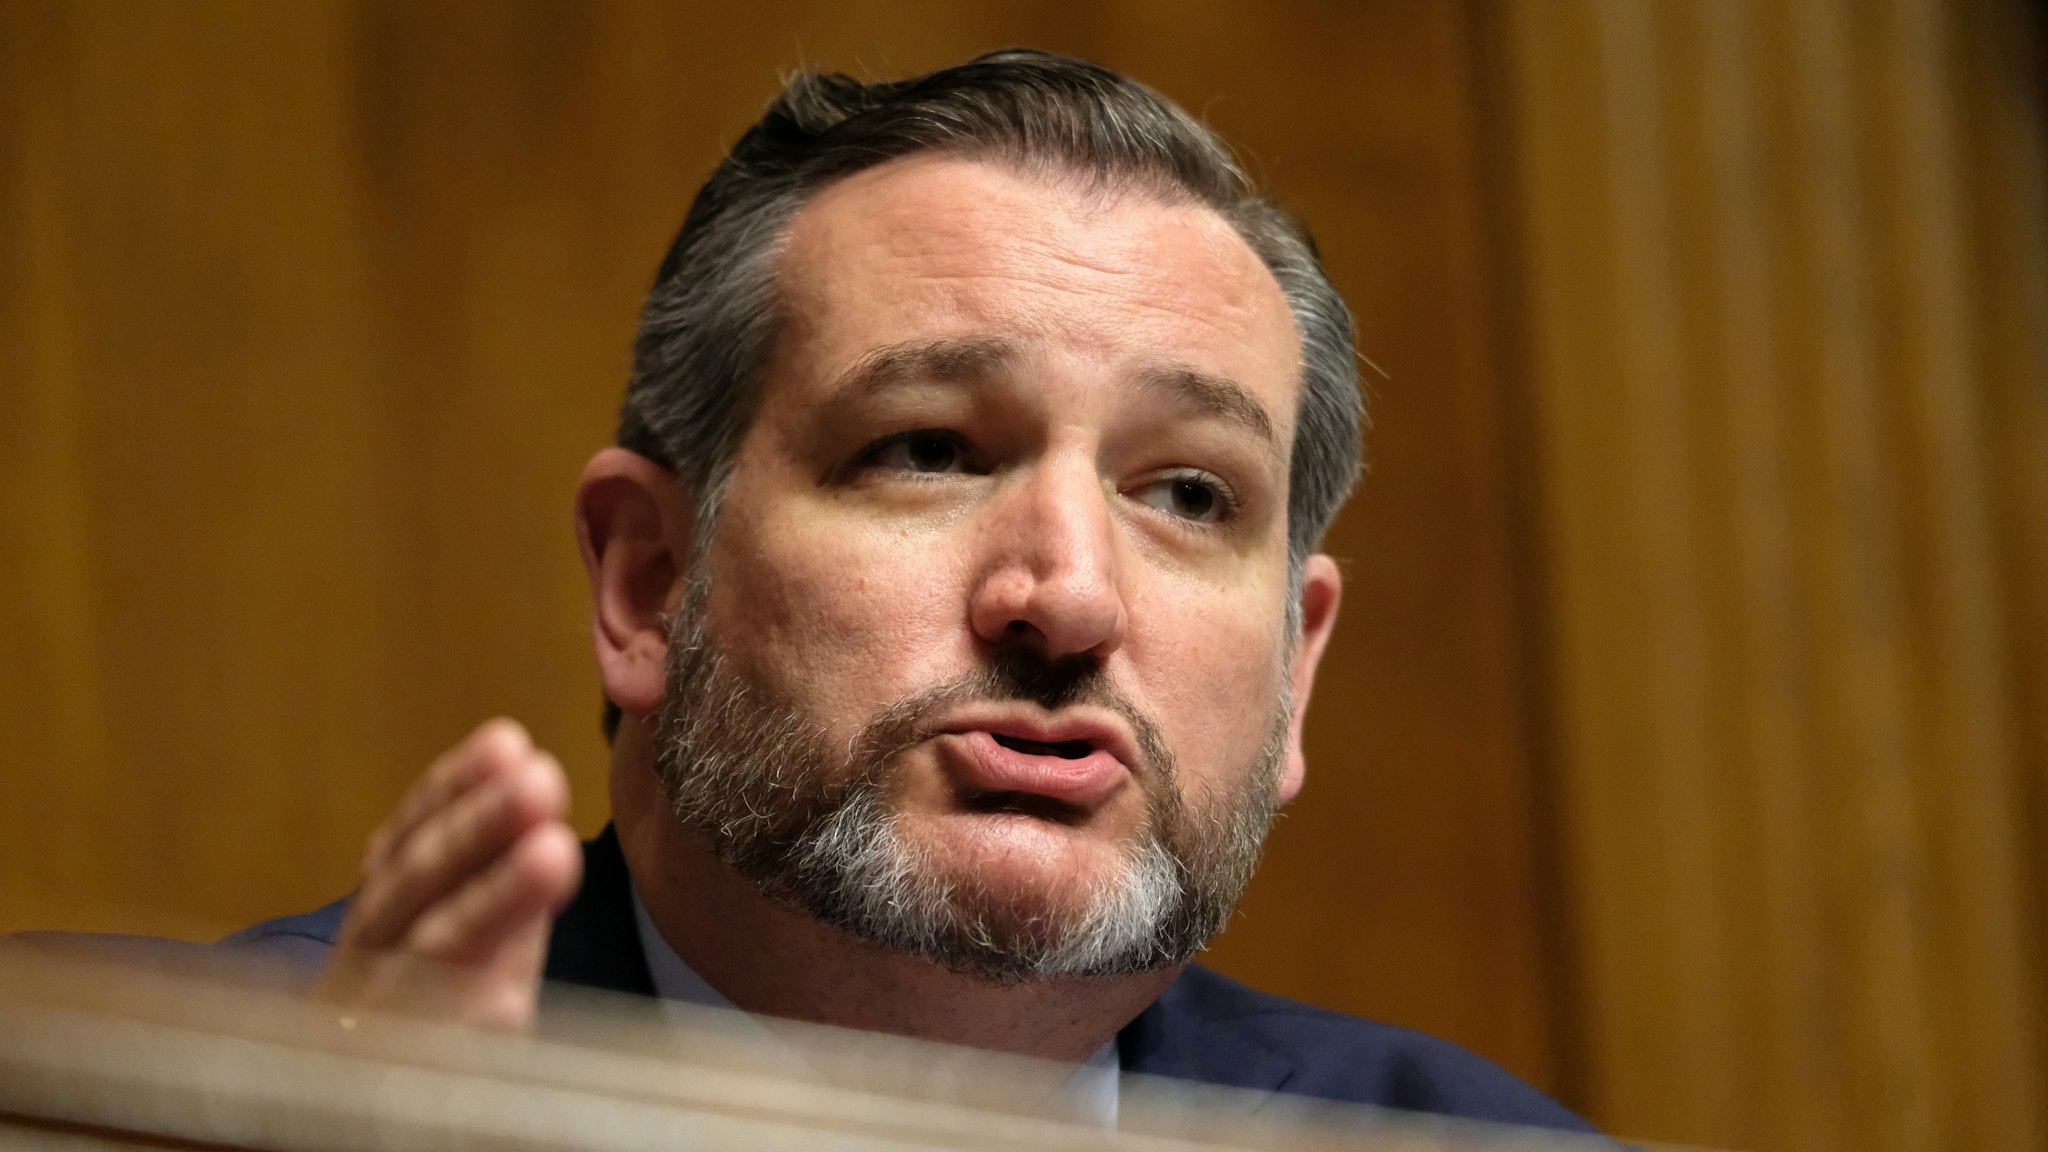 WASHINGTON, DC - APRIL 10: Sen.Ted Cruz (R-TX) speaks at a Senate Judiciary Committee hearing on April 10, 2019 in Washington, DC. The Republican-controlled Senate Judiciary Committee is questioning whether large tech companies are biased towards conservatives.